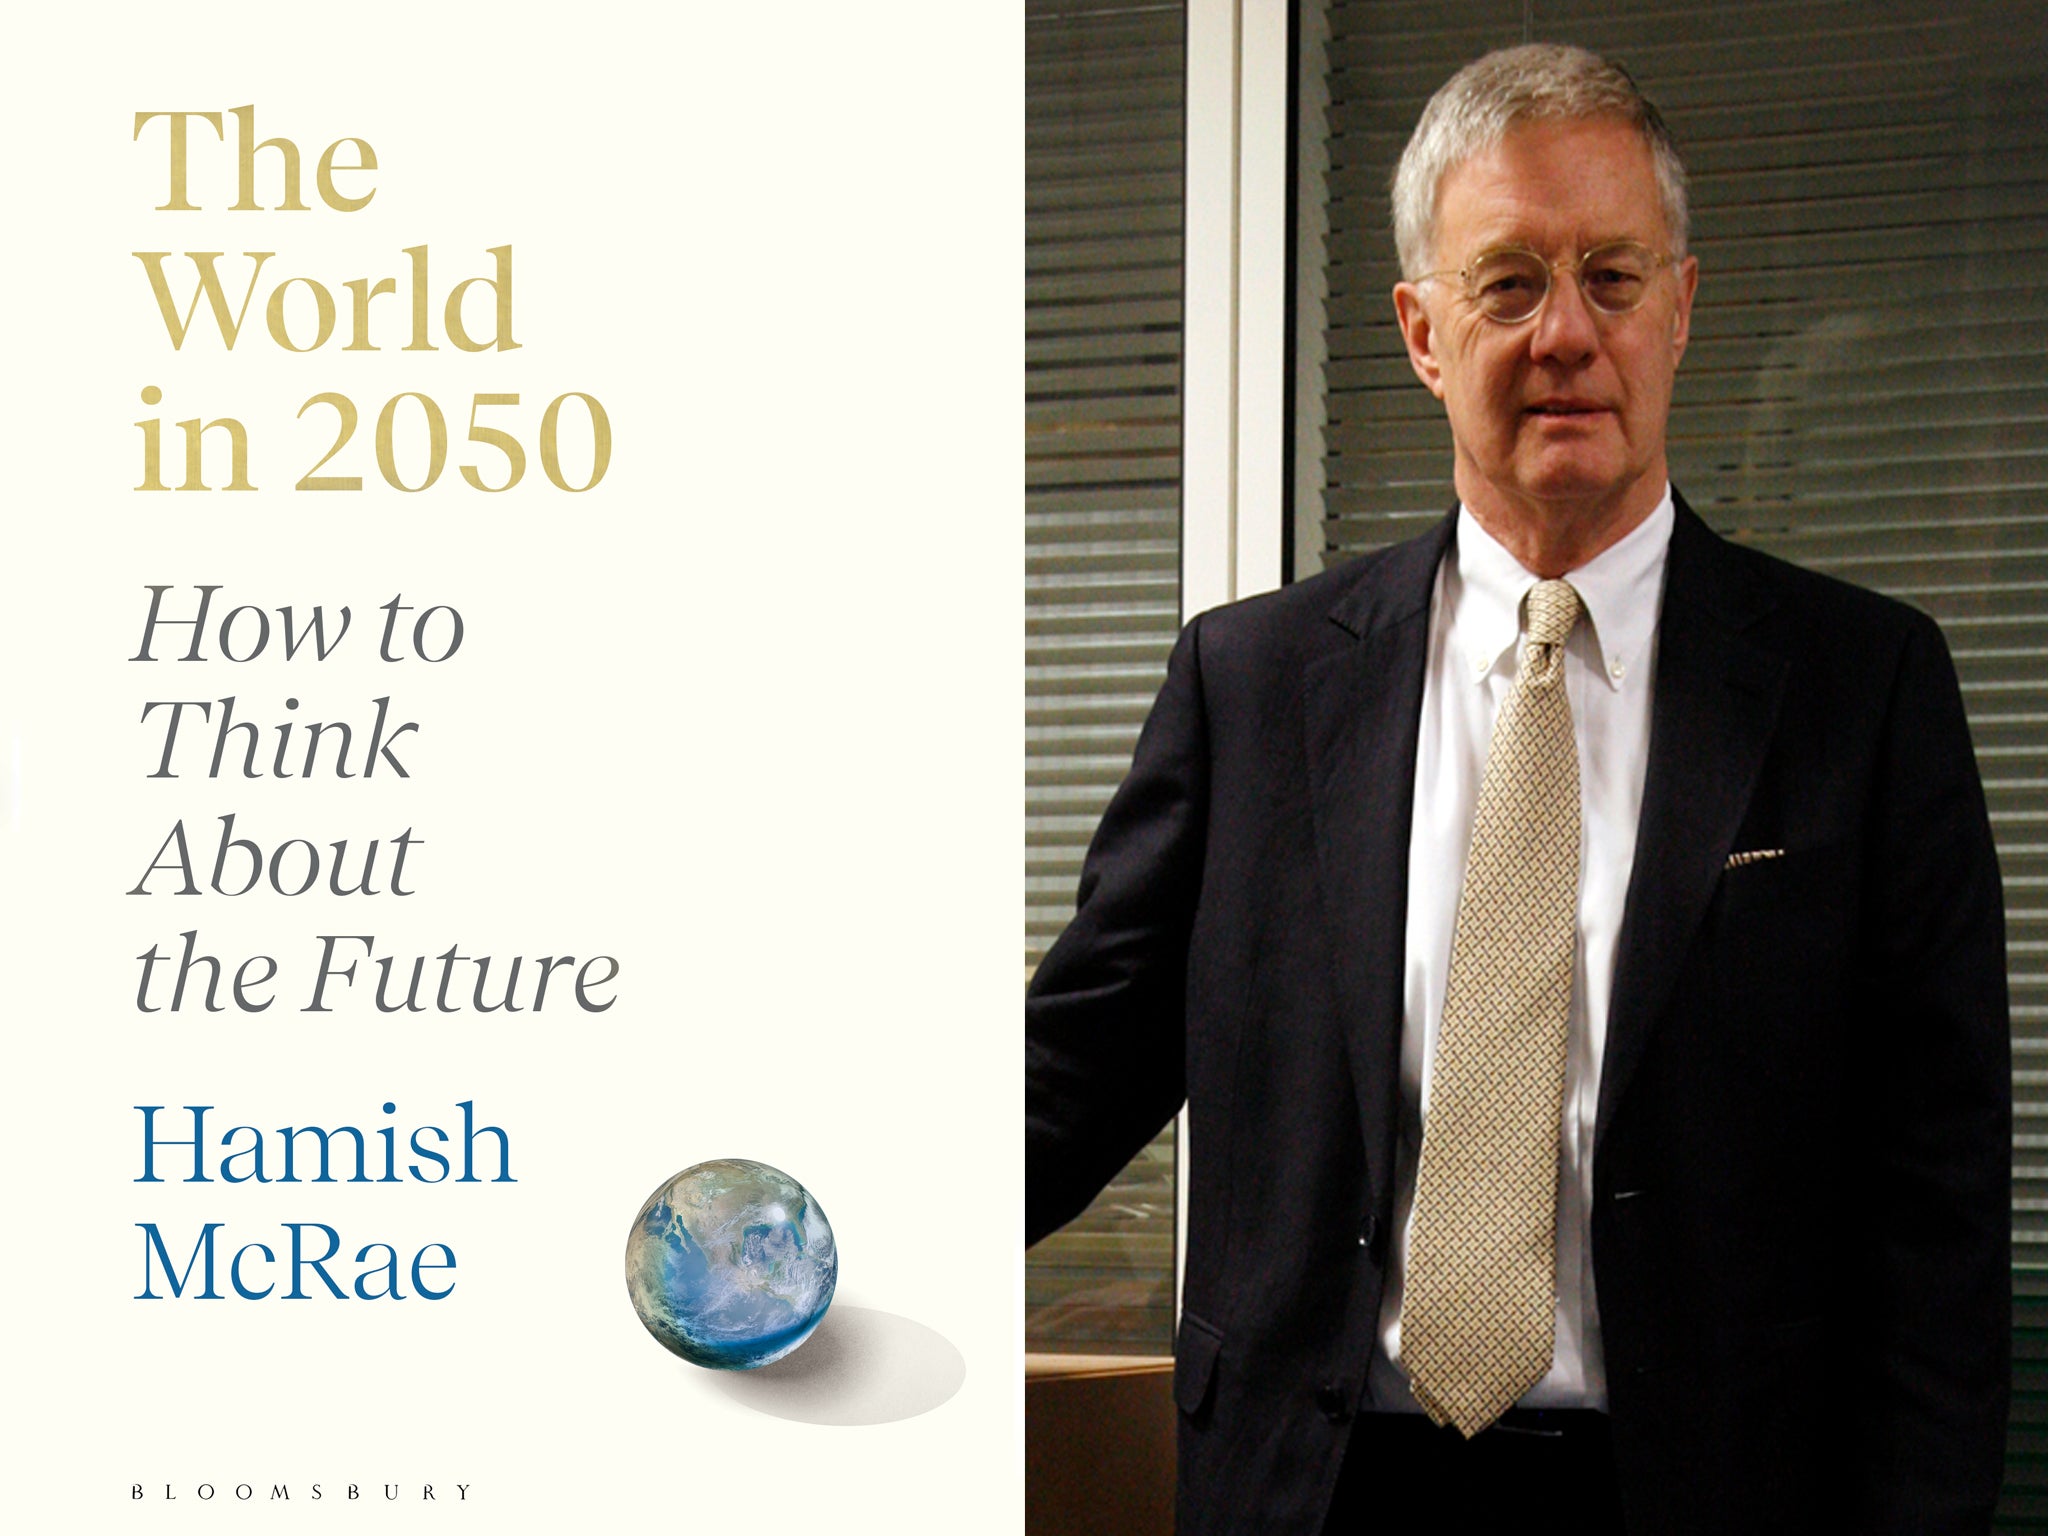 In ‘The World in 2050: How to Think About the Future, Hamish McRae, who writes about economics for The Independent, is surprisingly optimistic about the UK’s future